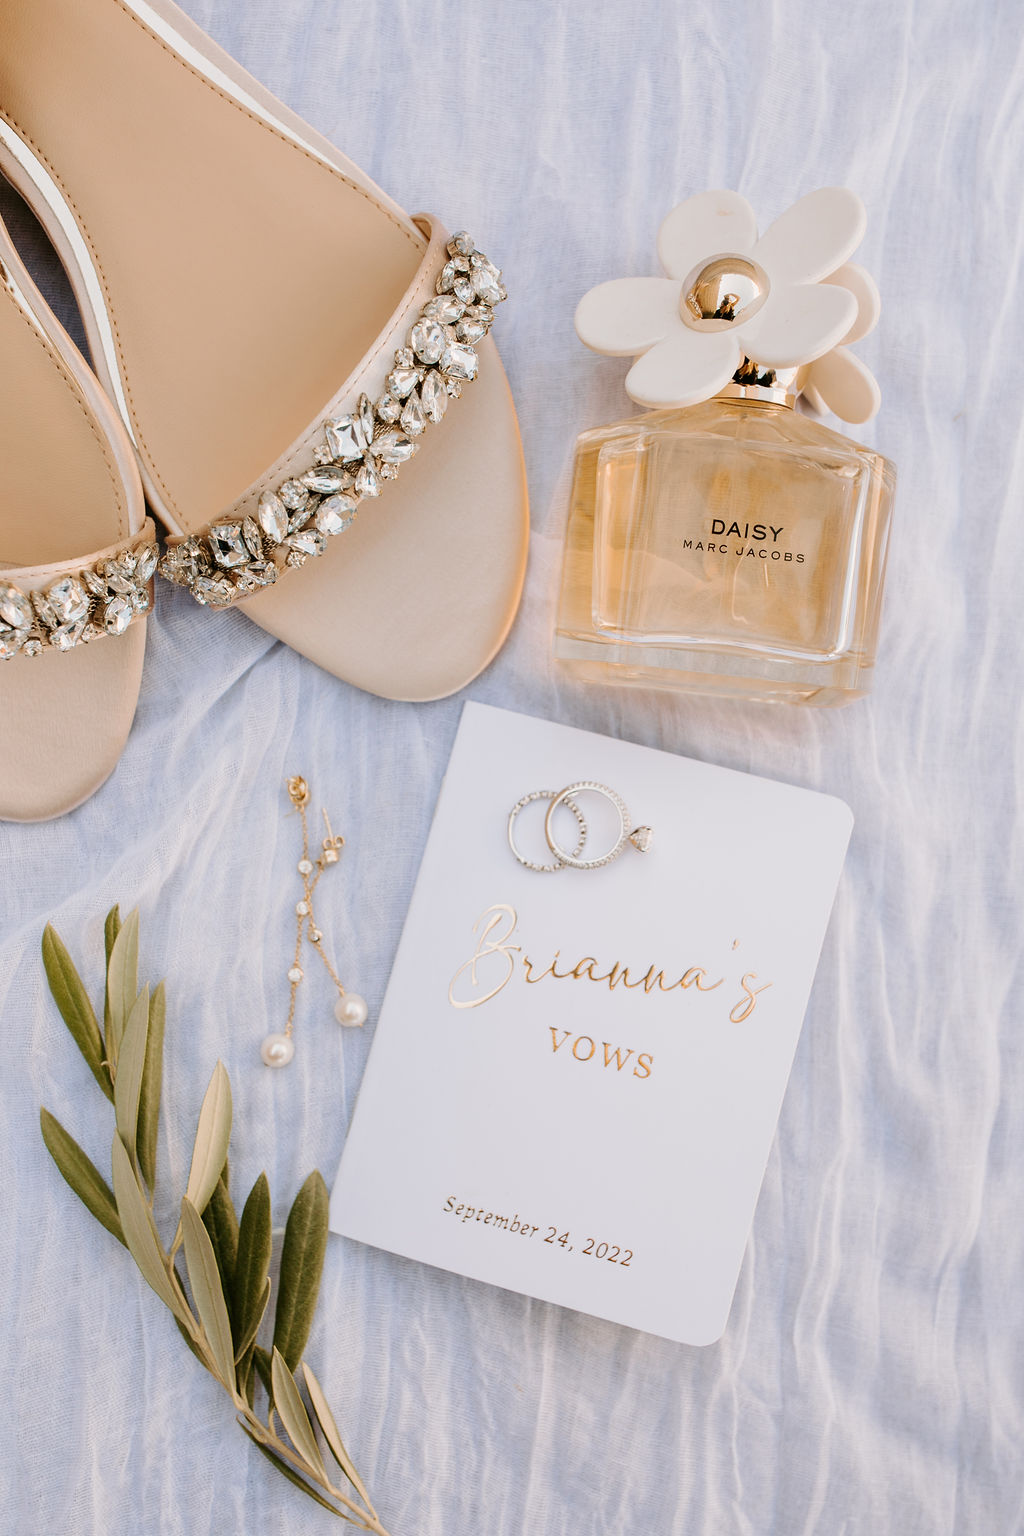 Brides custom white and gold vow book with bridal shoes and perfume for wedding details 